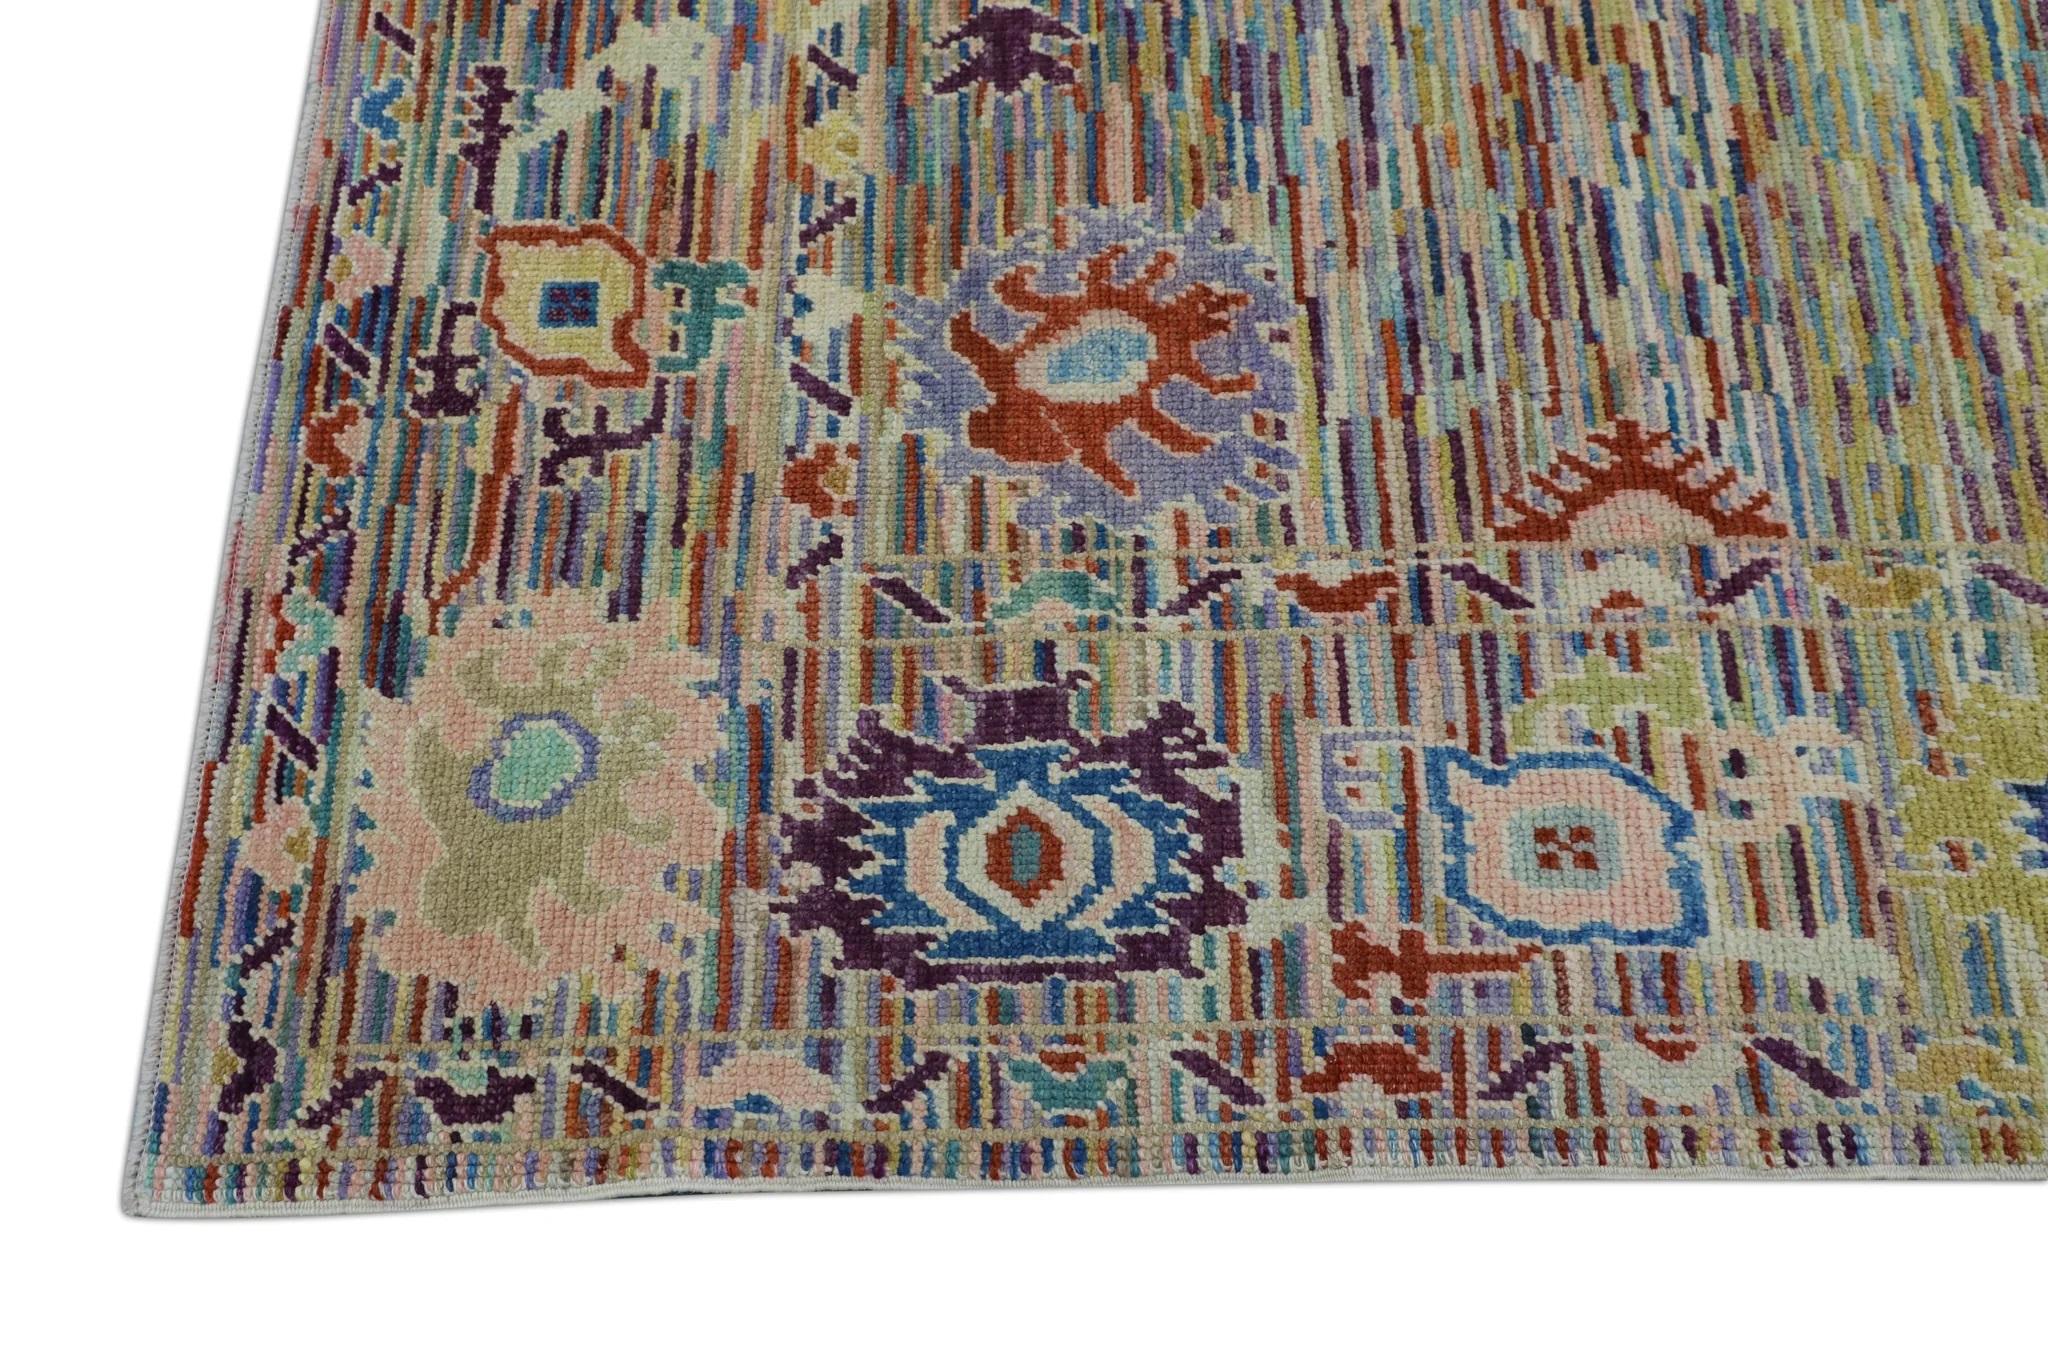 Contemporary Handwoven Wool Turkish Oushak Rug in Colorful Geometric Floral Design 8' x 10'1